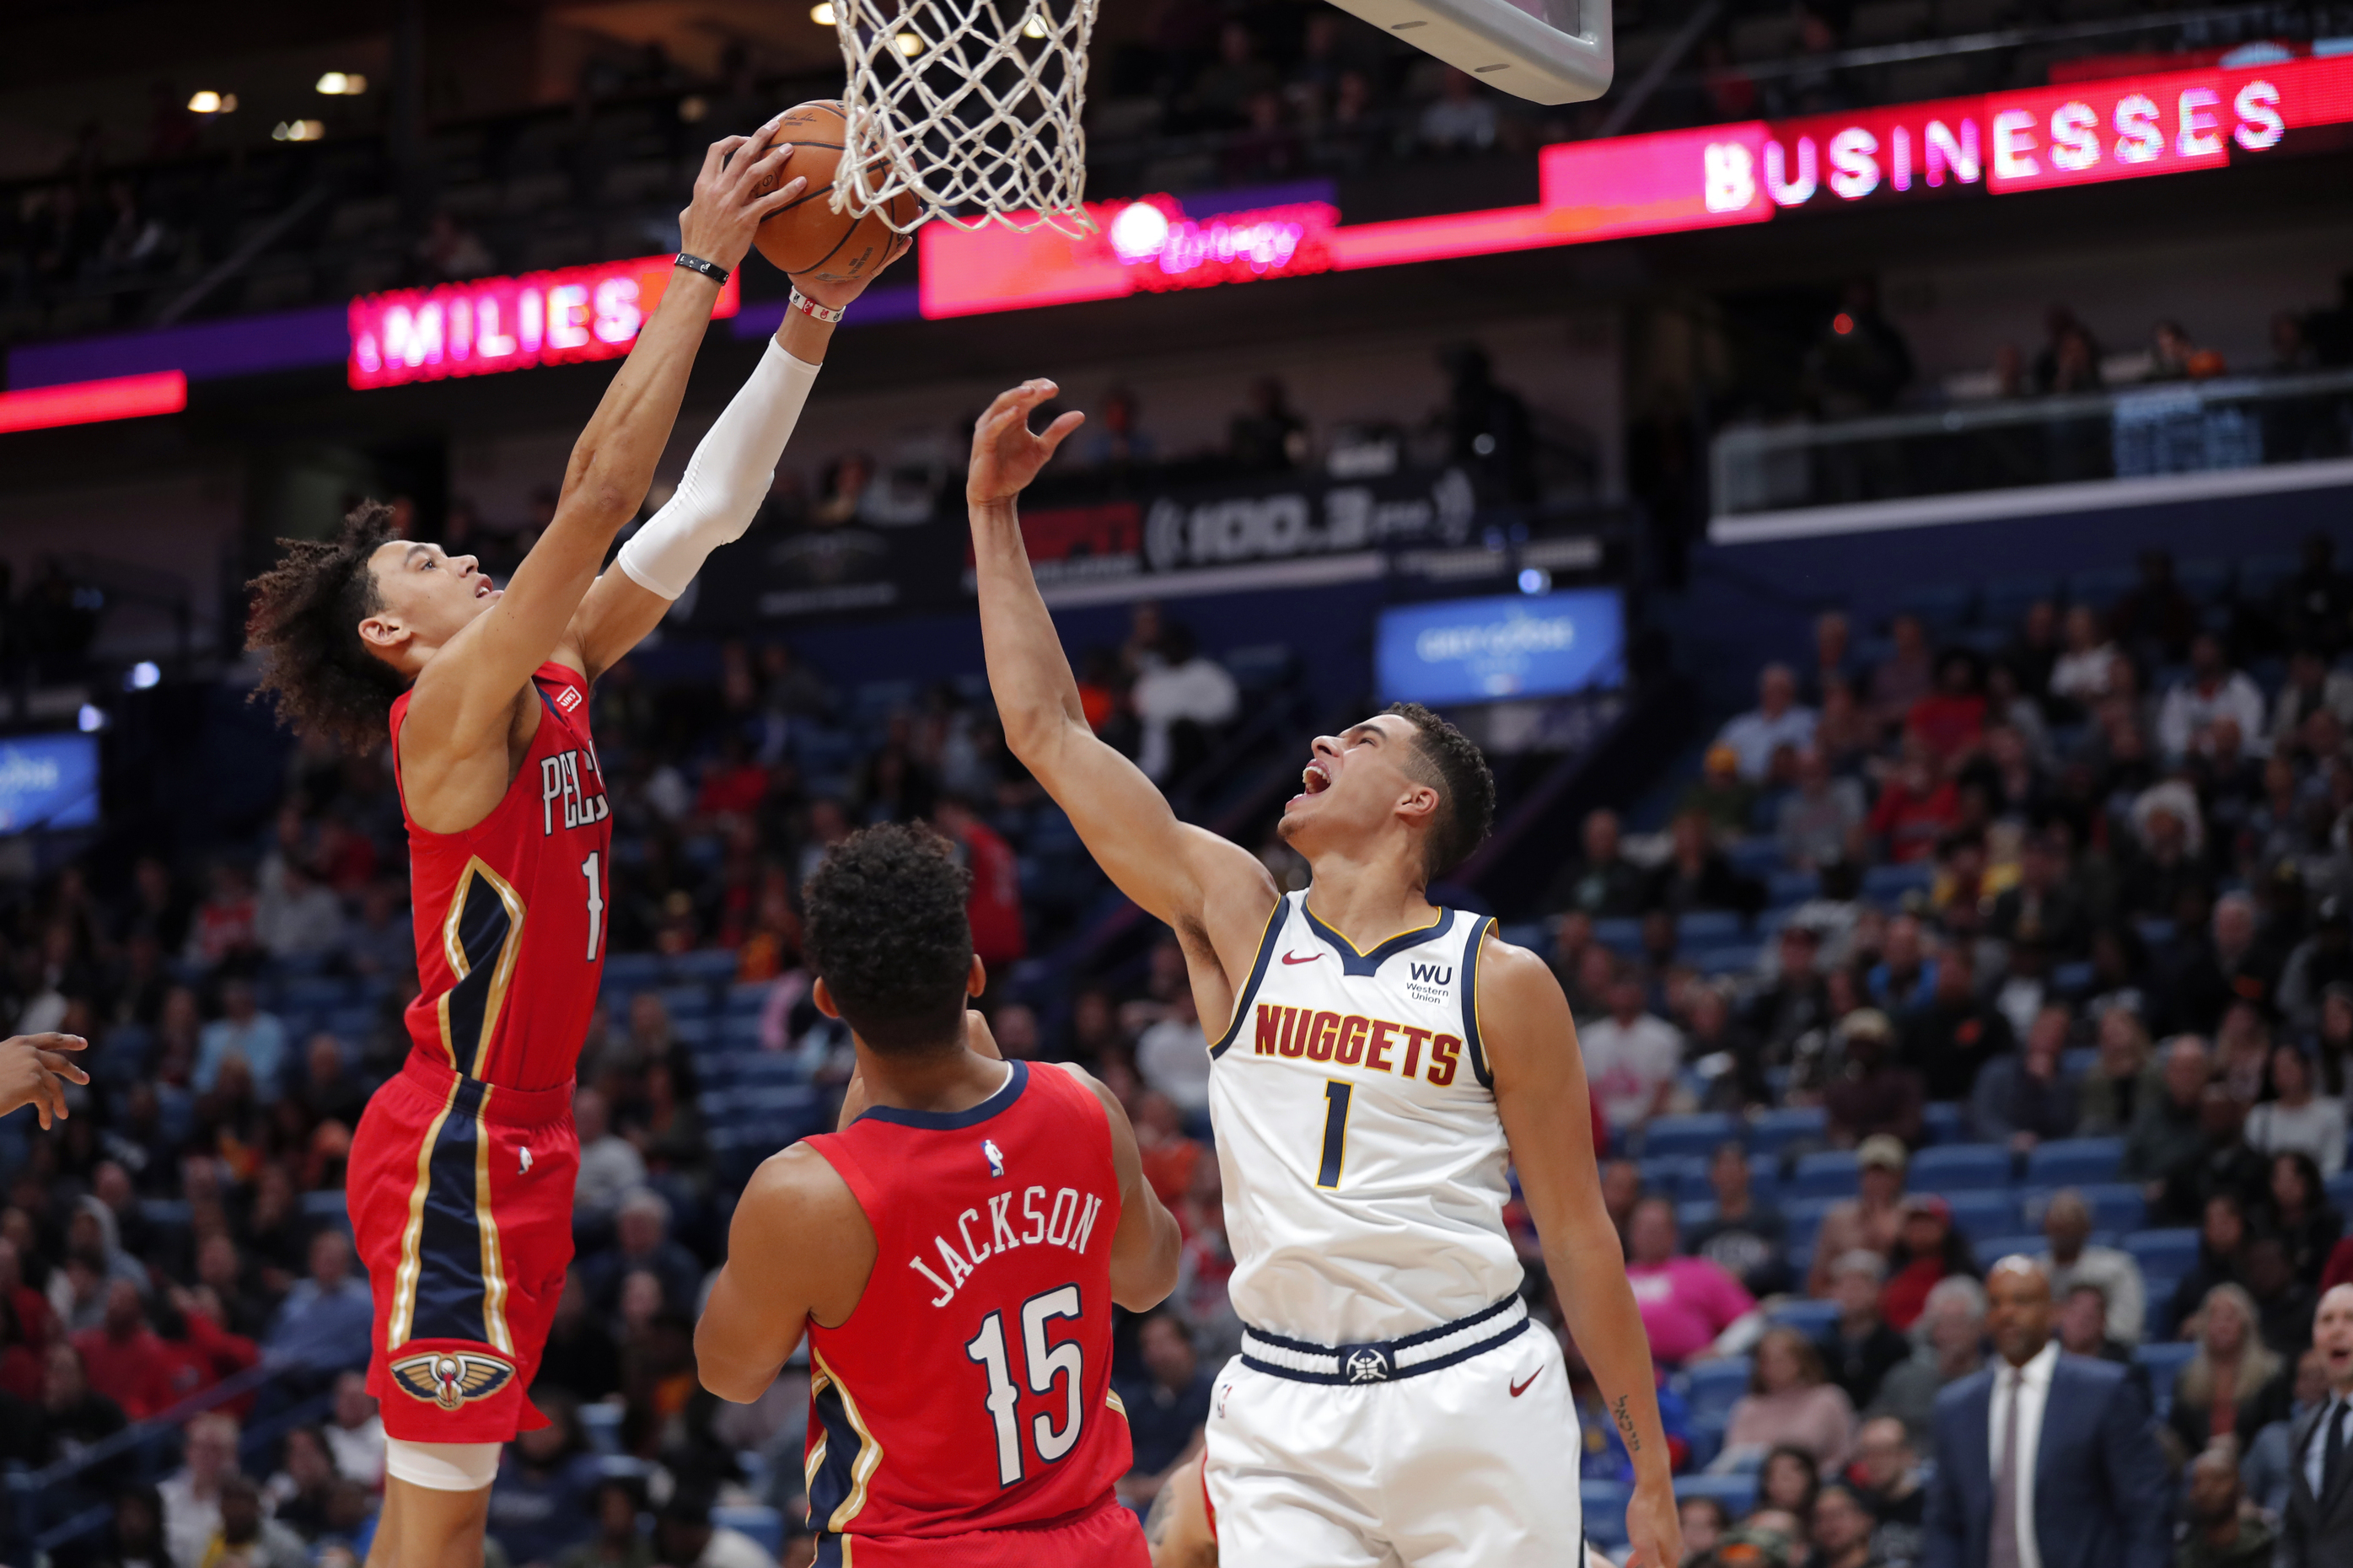 Pelicans beat Nuggets for first victory of season